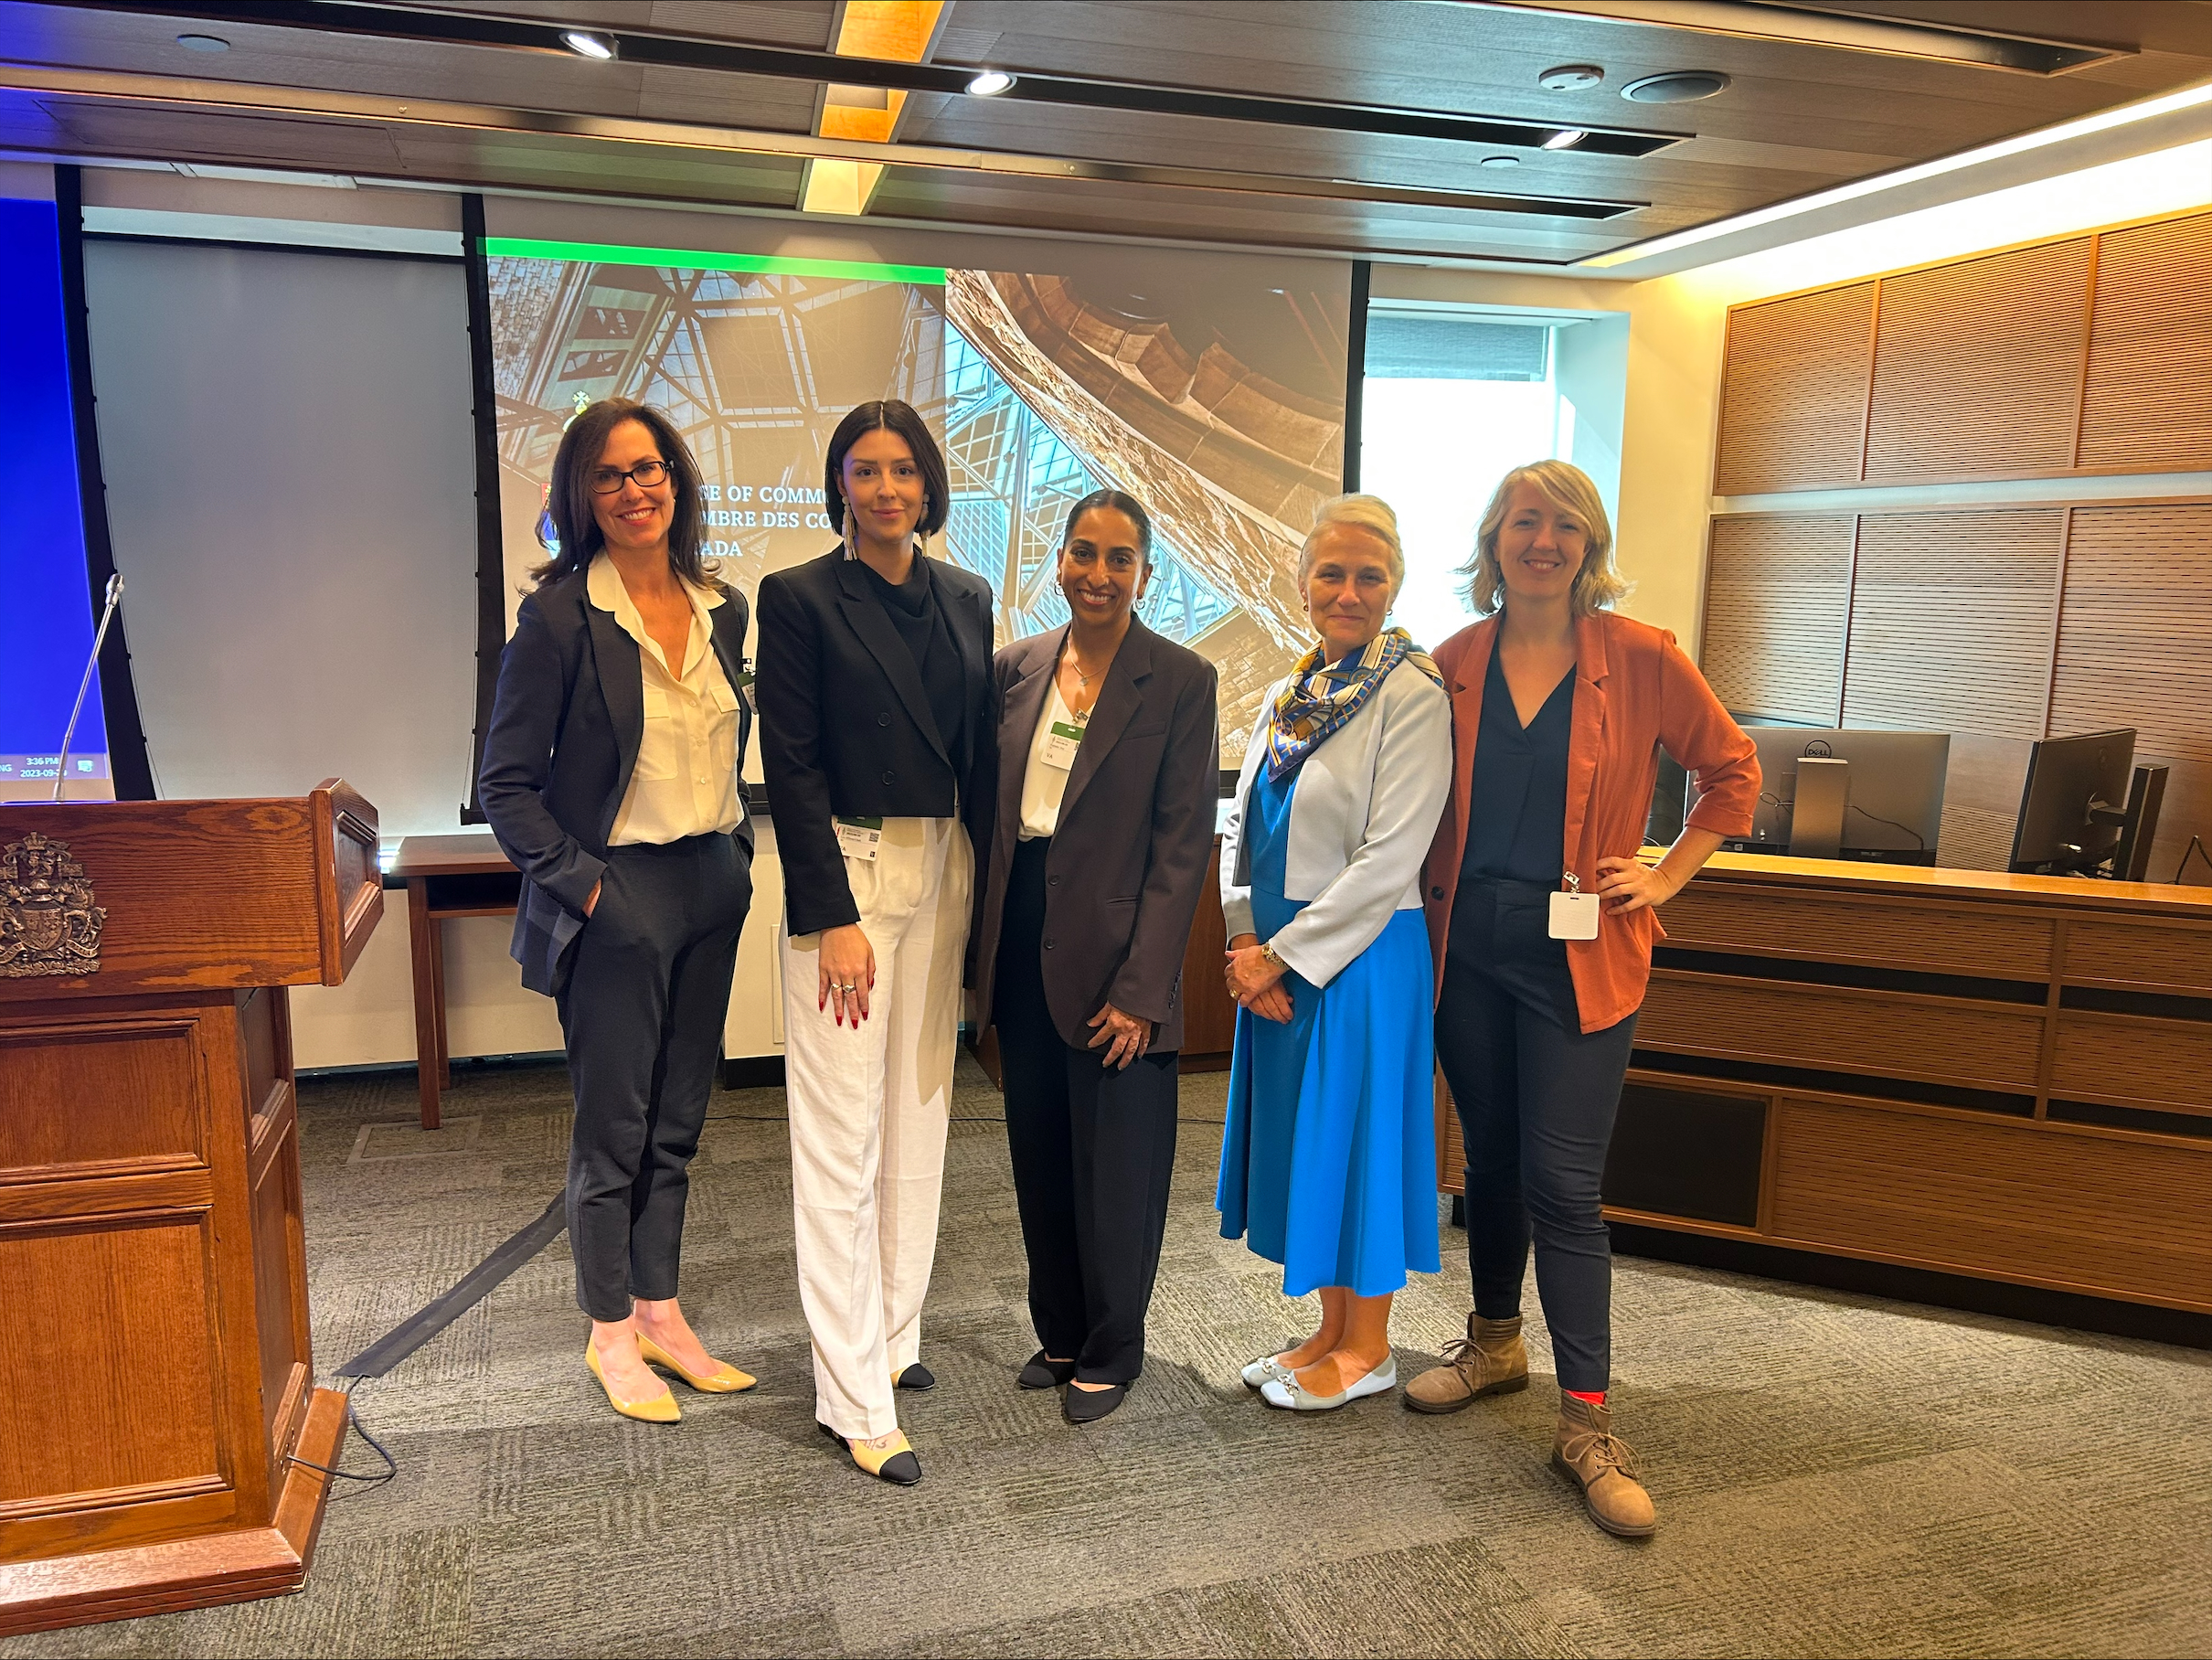 Dr. Amanda Black, SOGC President; Lee Allison Clark from the Native Women's Association; Dr. Rupinder Toor, physician and founder of Project of EmpowHER.; Dr. Wendy Norman of CART UBC and Kelly Bowden, from Action Canada.